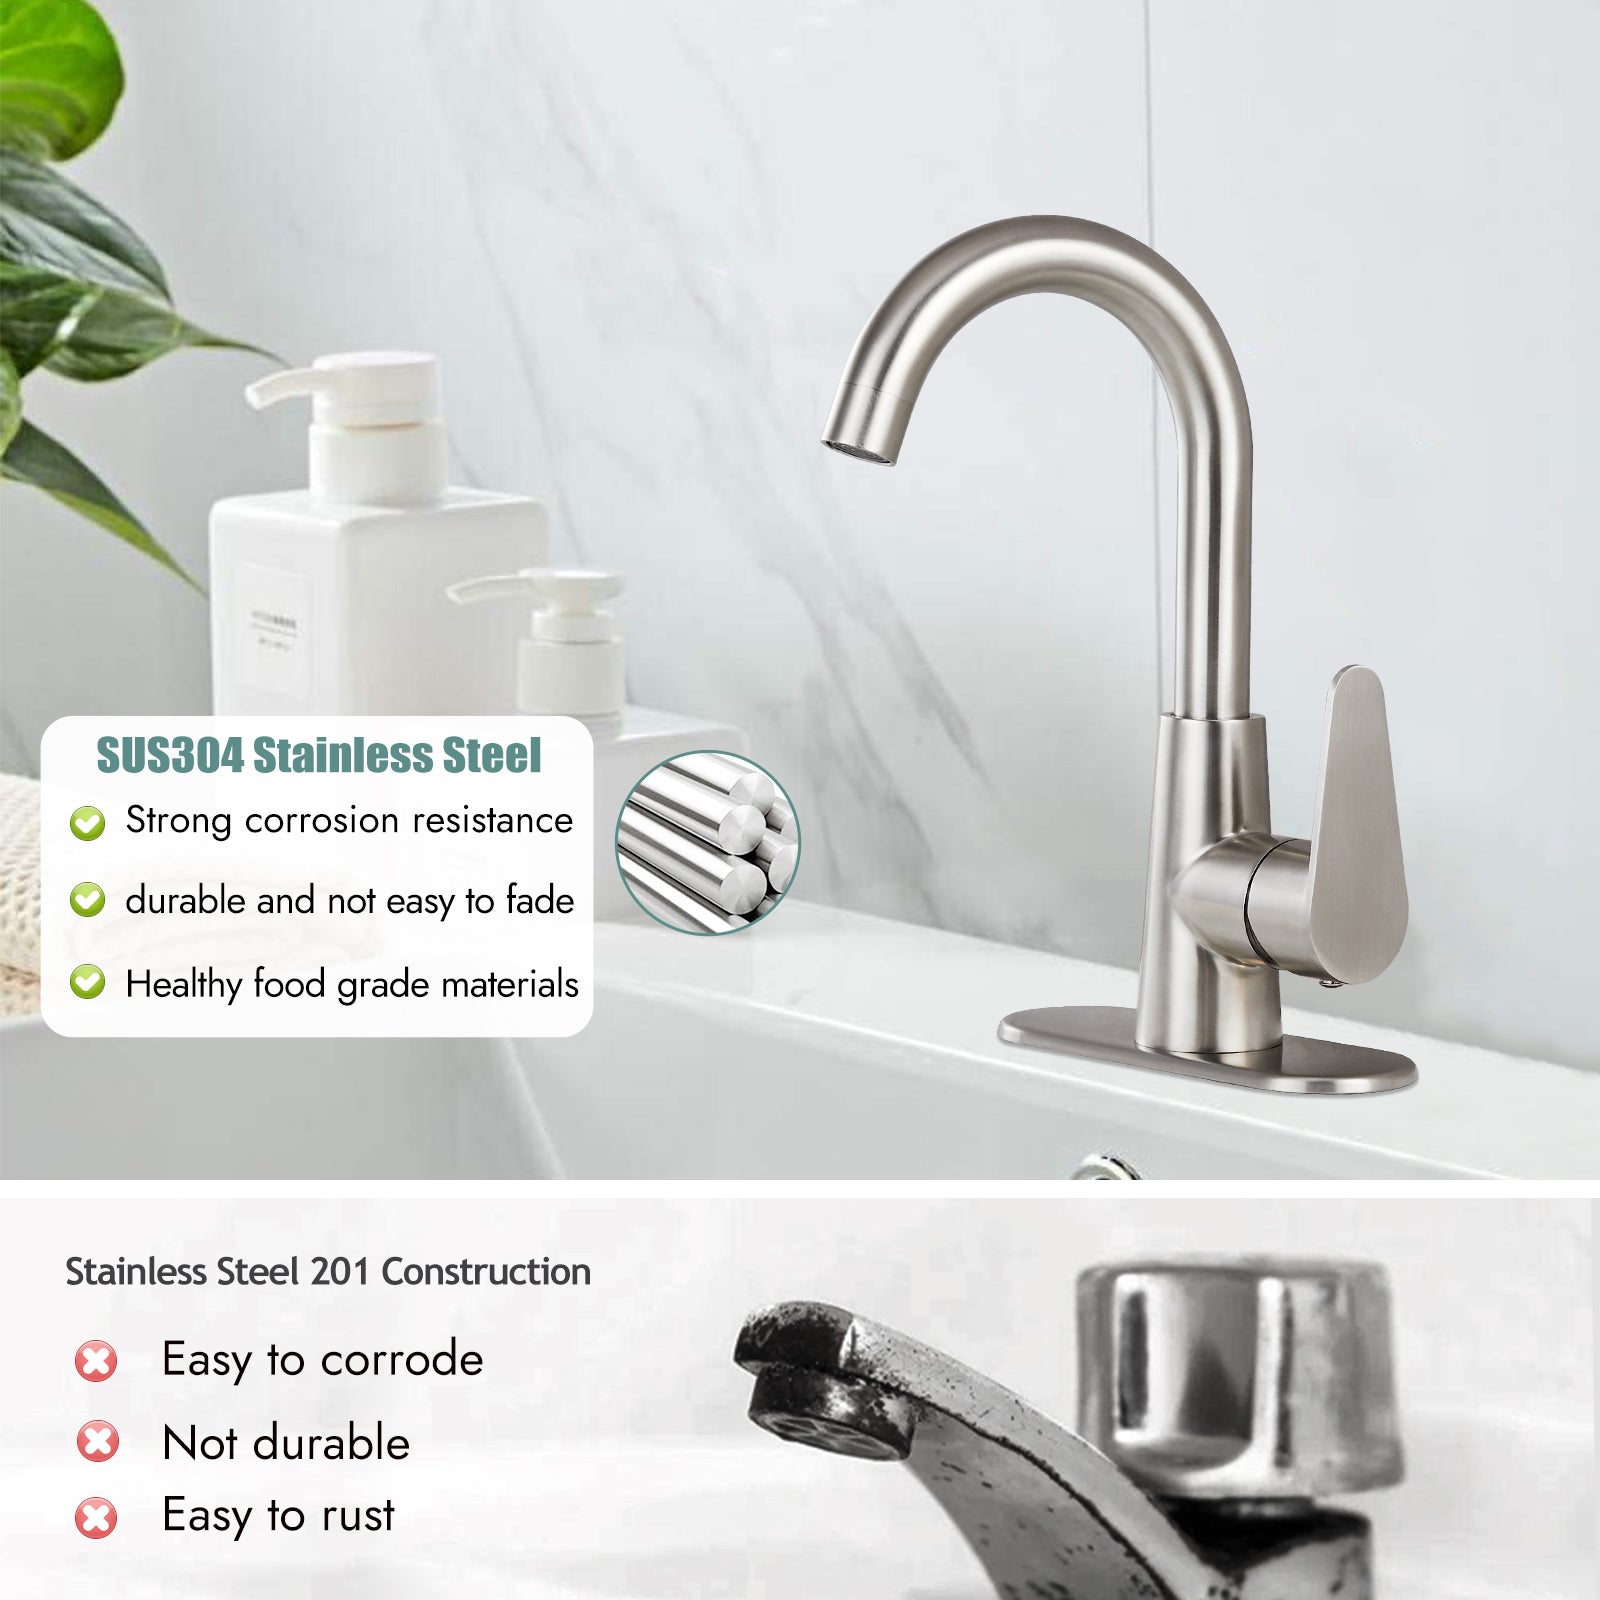 Heyalan Bathroom Sink Faucet Brushed Nickel Cold and Hot Water Single Hole Kitchen Bar Tap 360 Degree Swivel Spout Deck Mount Arc SUS304 Stainless Steel Gooseneck with Deck Plate and Drain